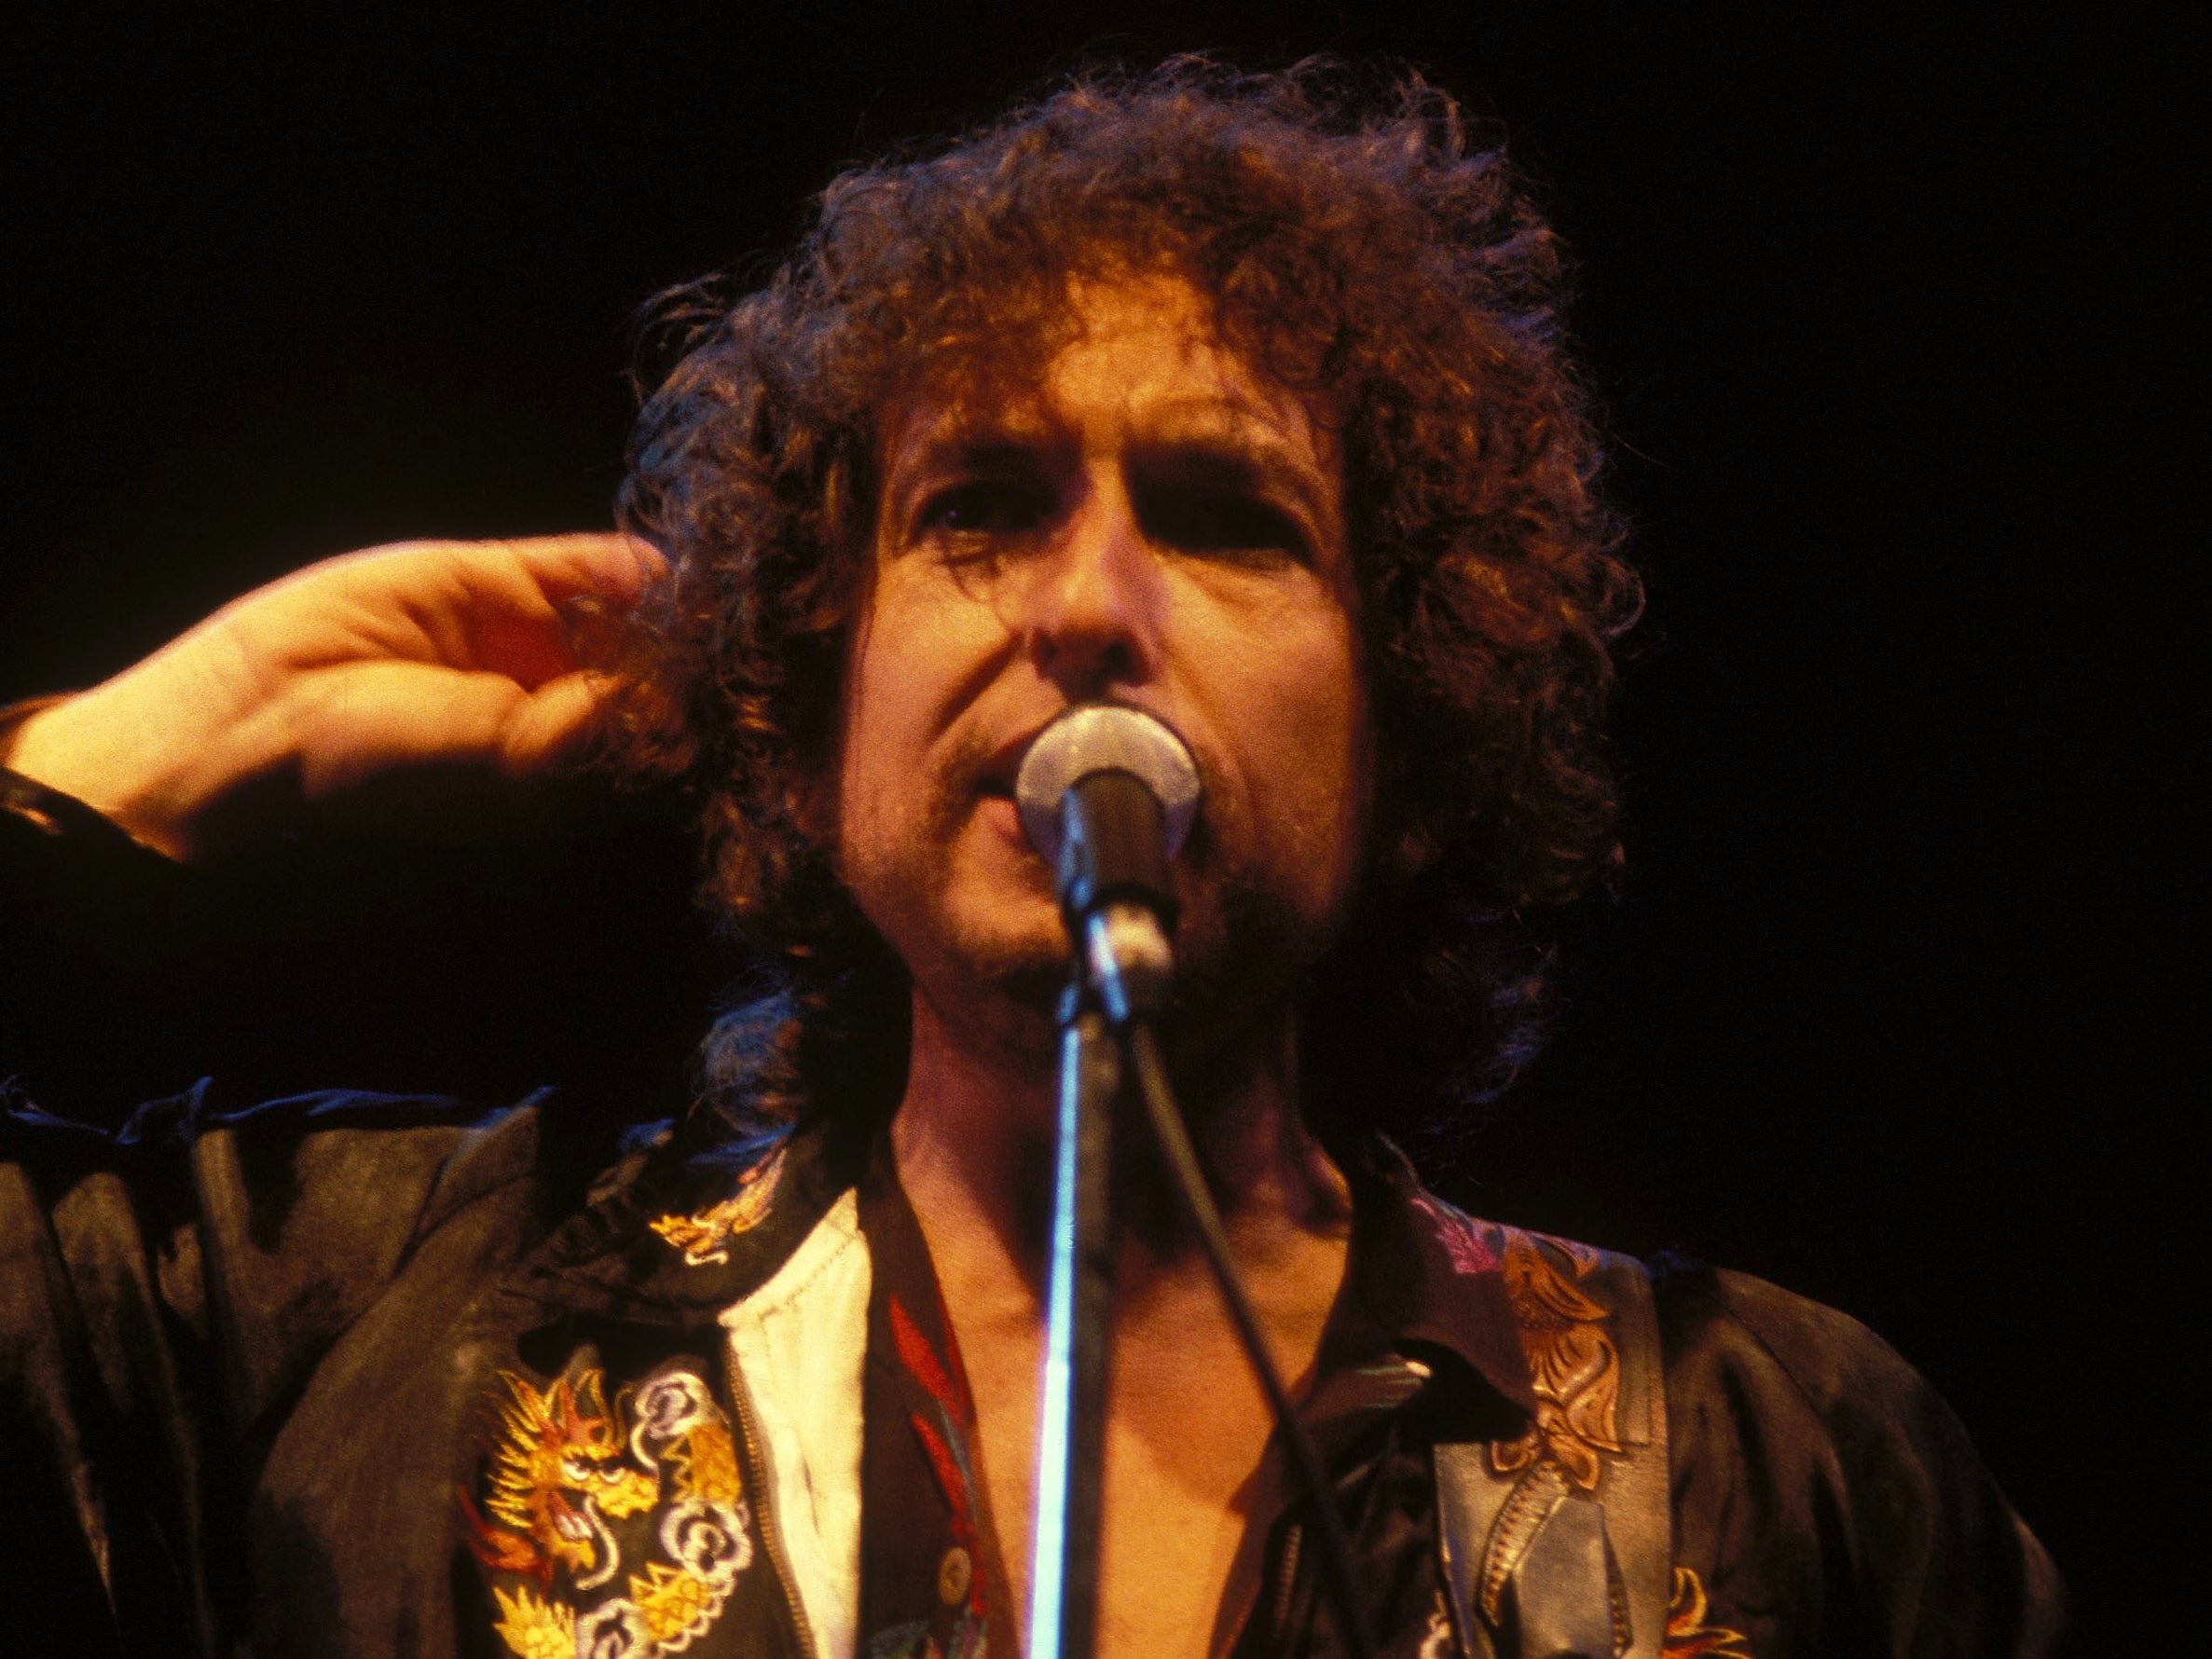 Mea Culpa Getting Out Of The Way Of The New Bob Dylan Box Set The Independent